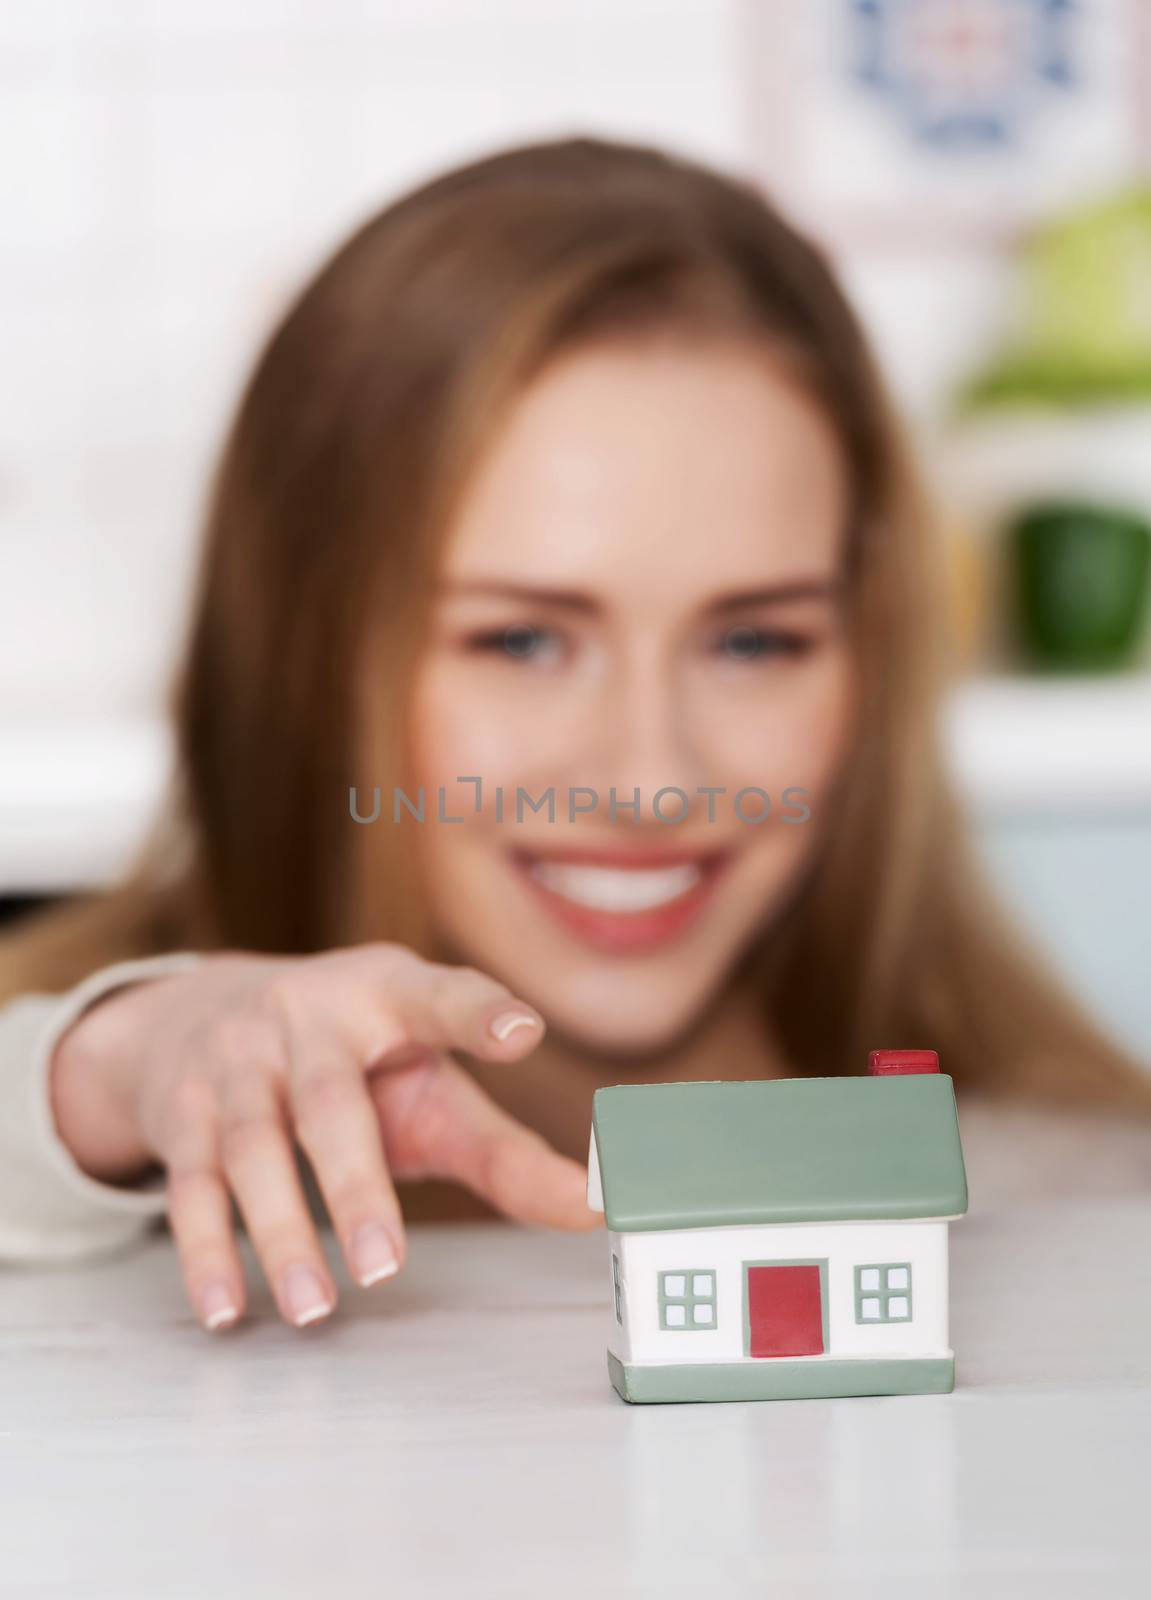 Beautiful caucasian woman and small house model. Focus on house. Indoor background.